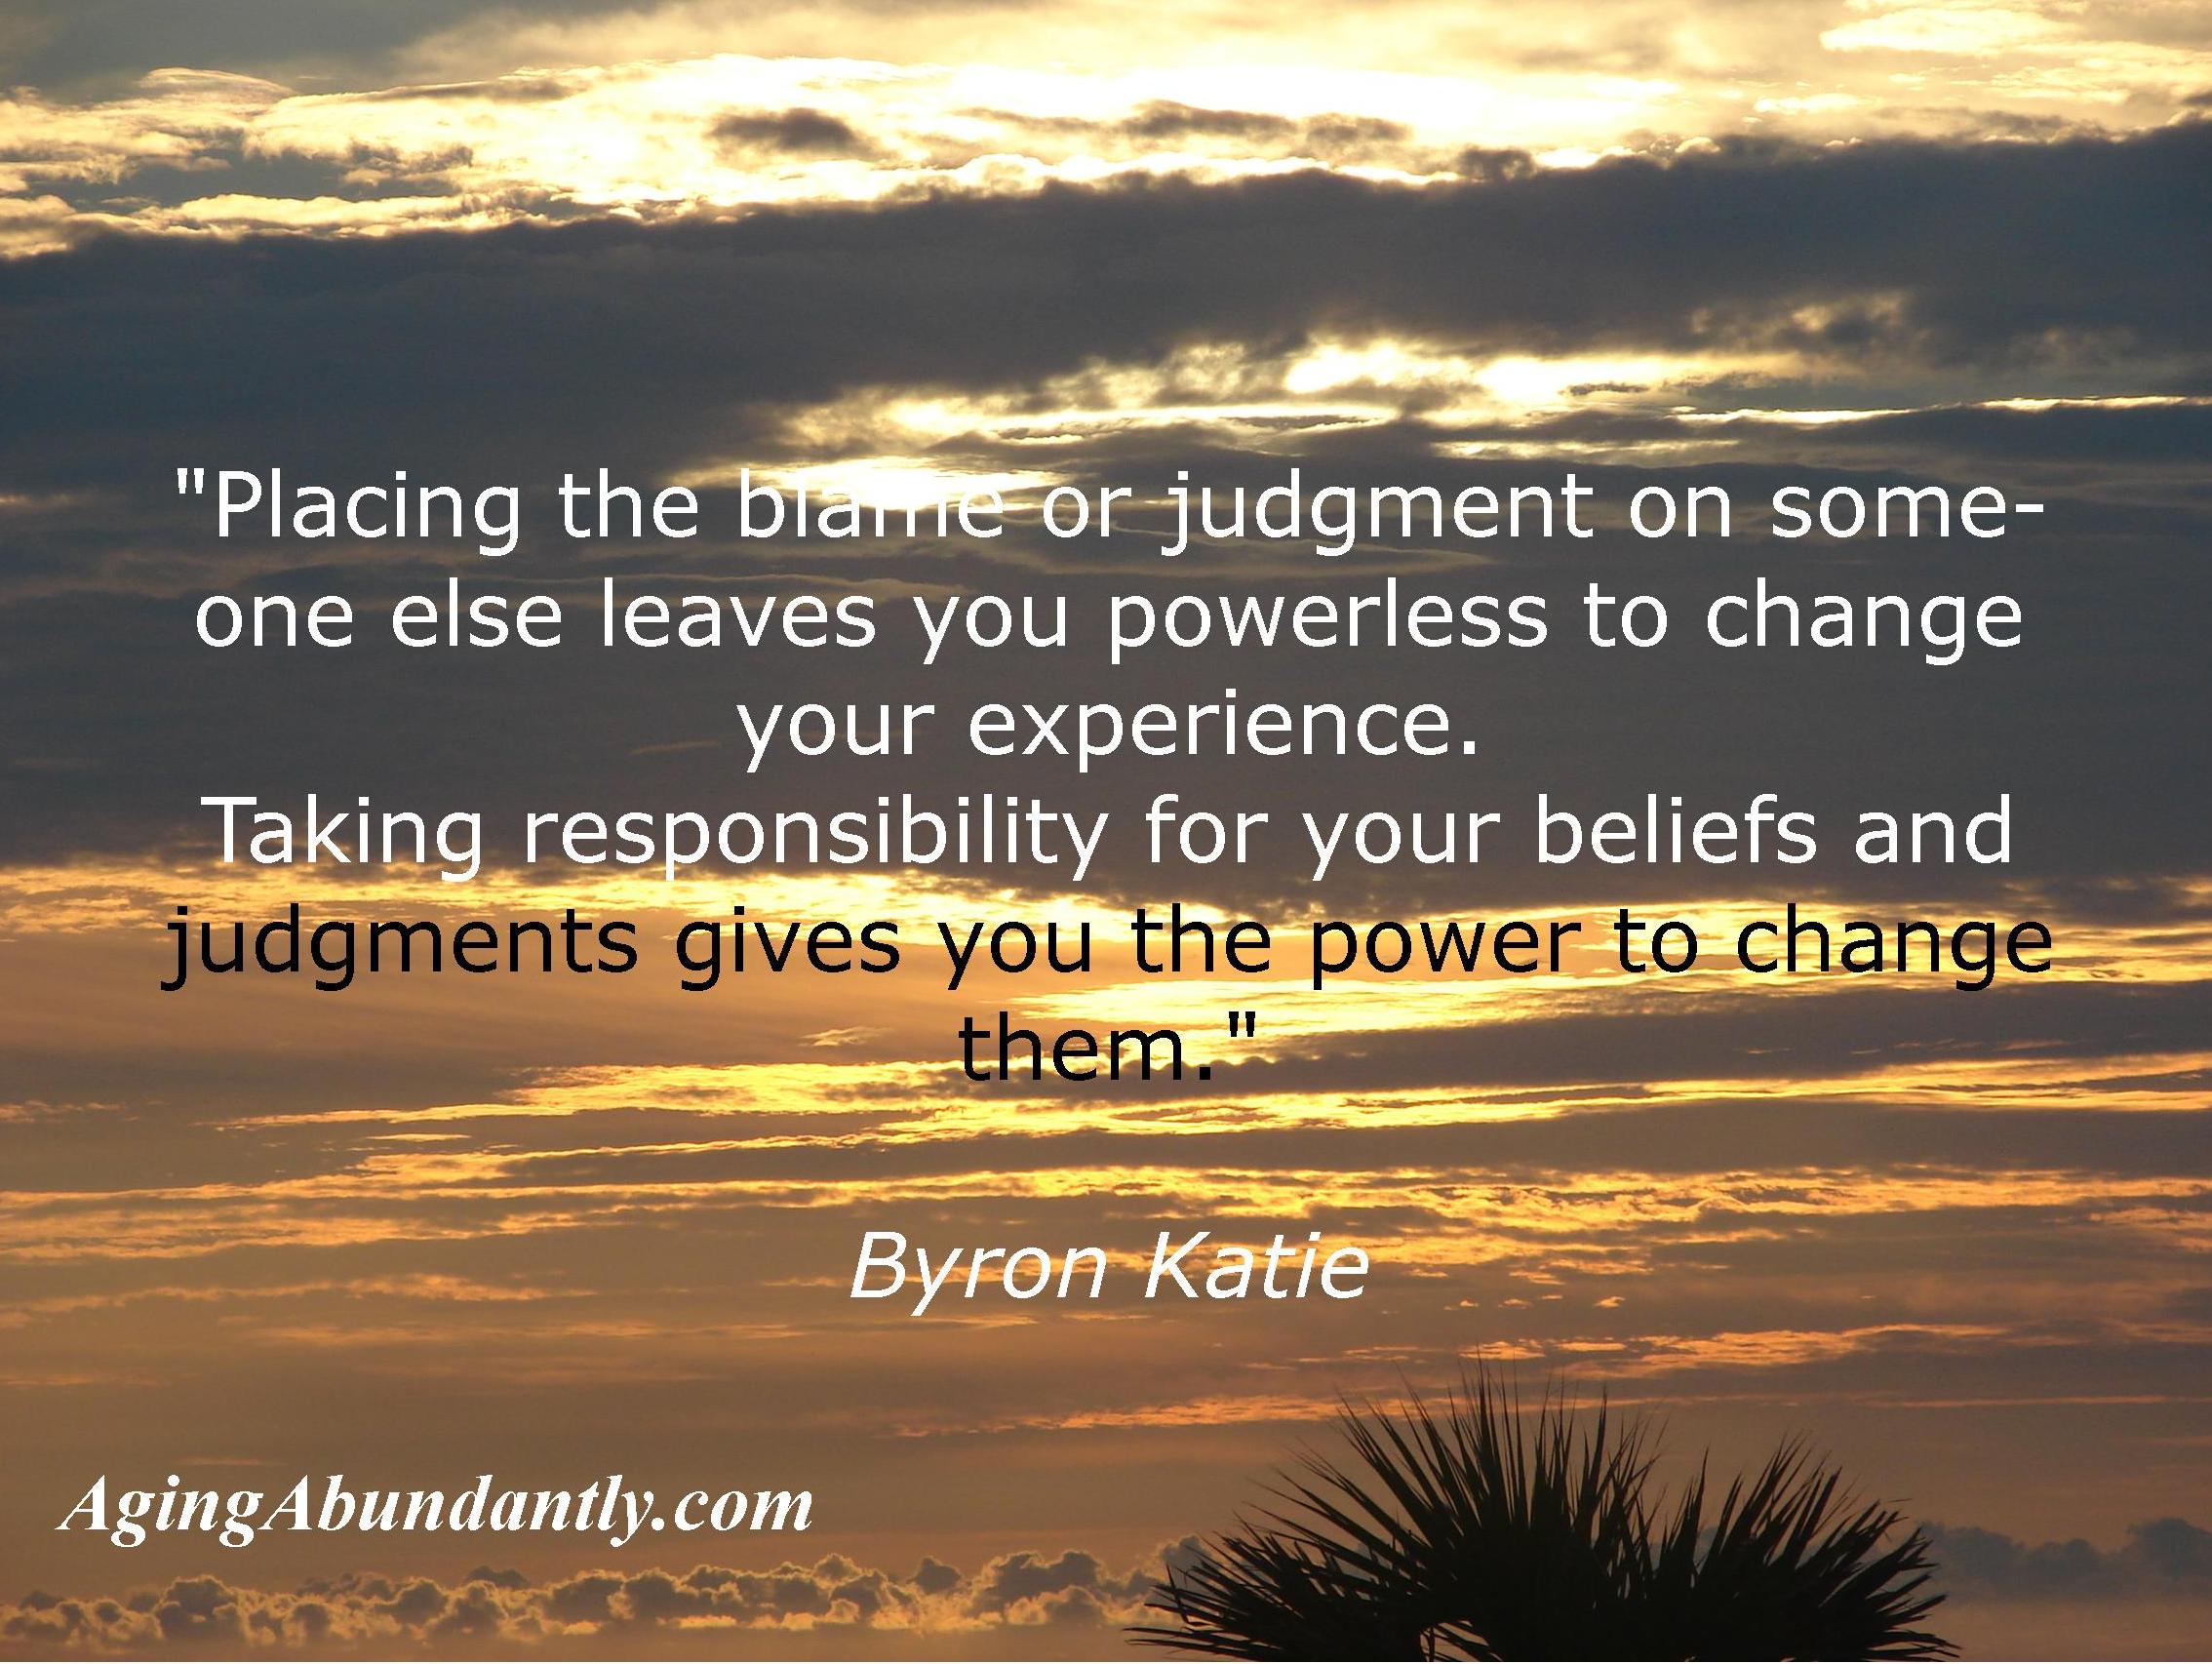 Placing the blame or judgment on someone else leaves you powerless to change your experience; taking responsibility for your beliefs and judgments gives you the power to change them - Byron Katie